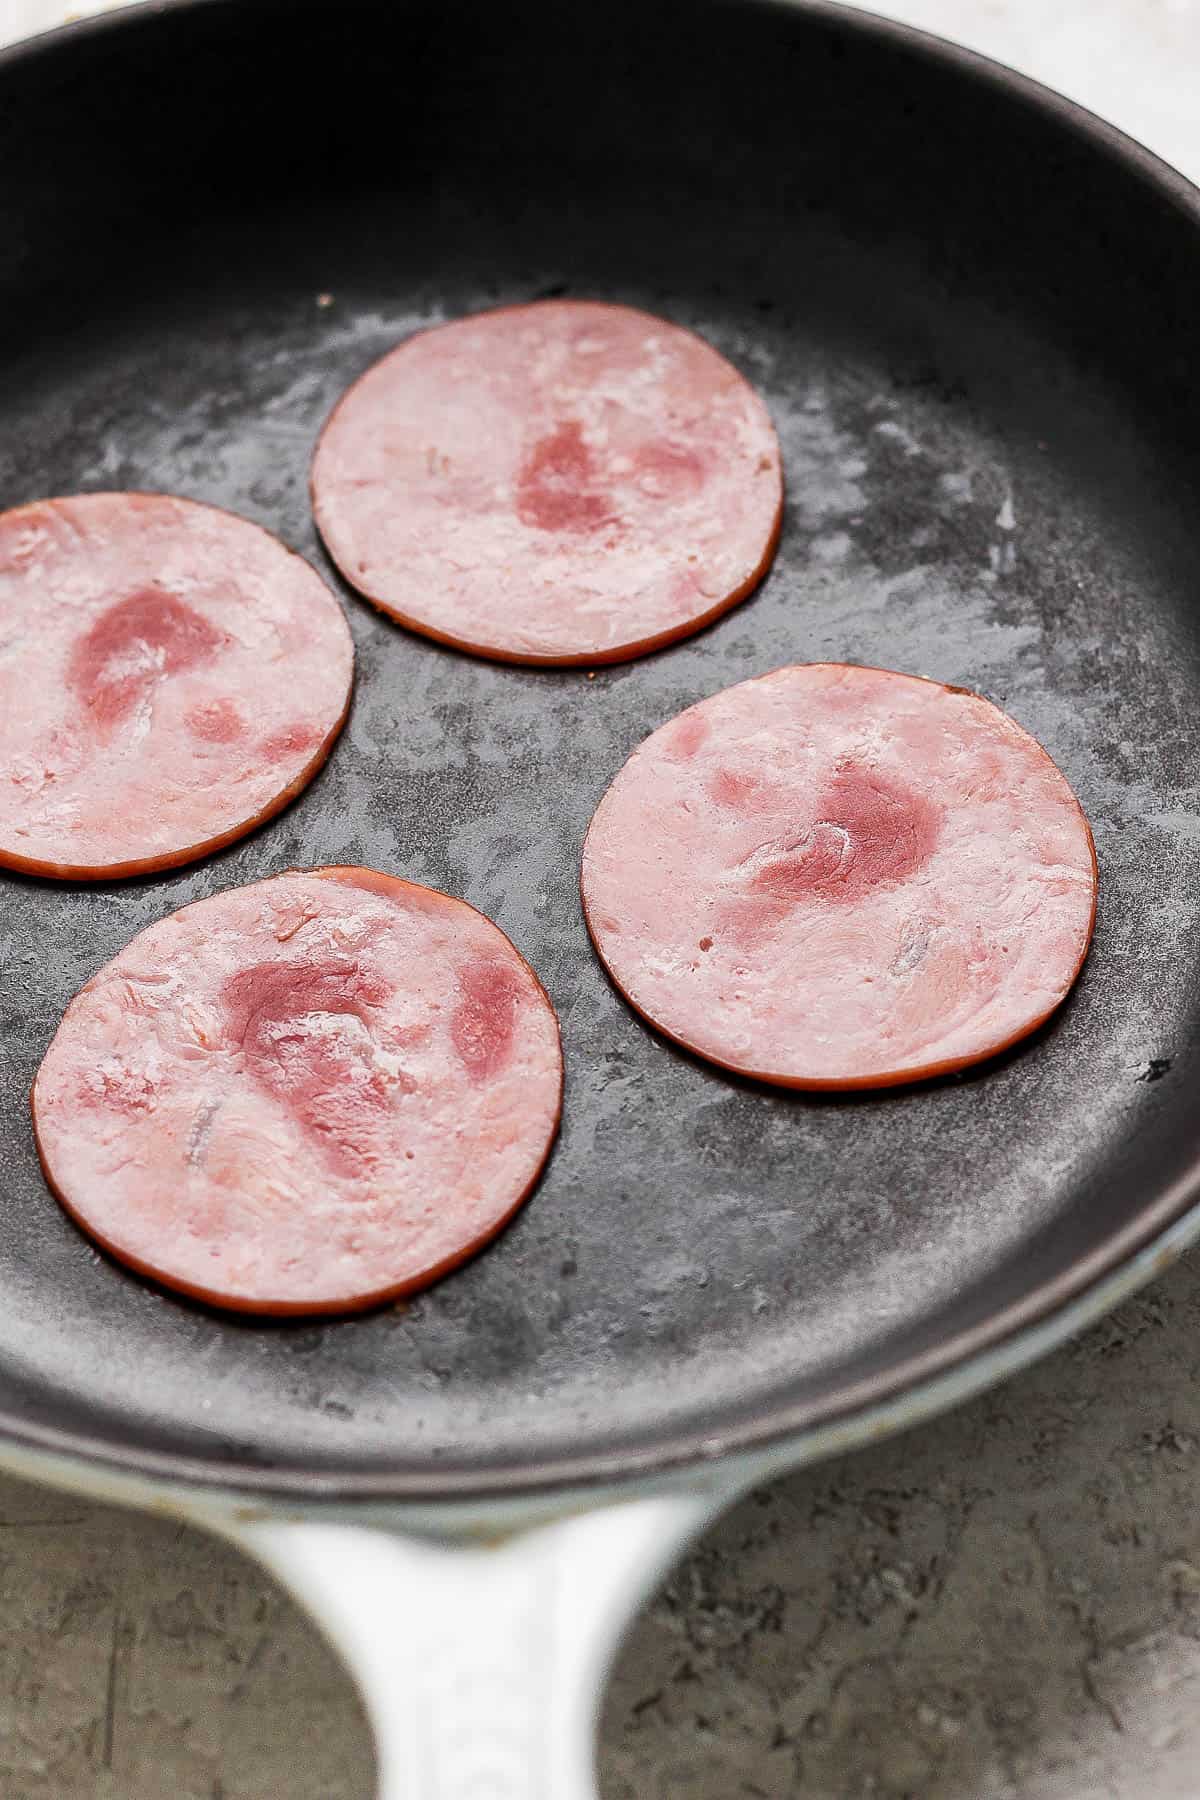 Slices of Canadian bacon in a skillet.